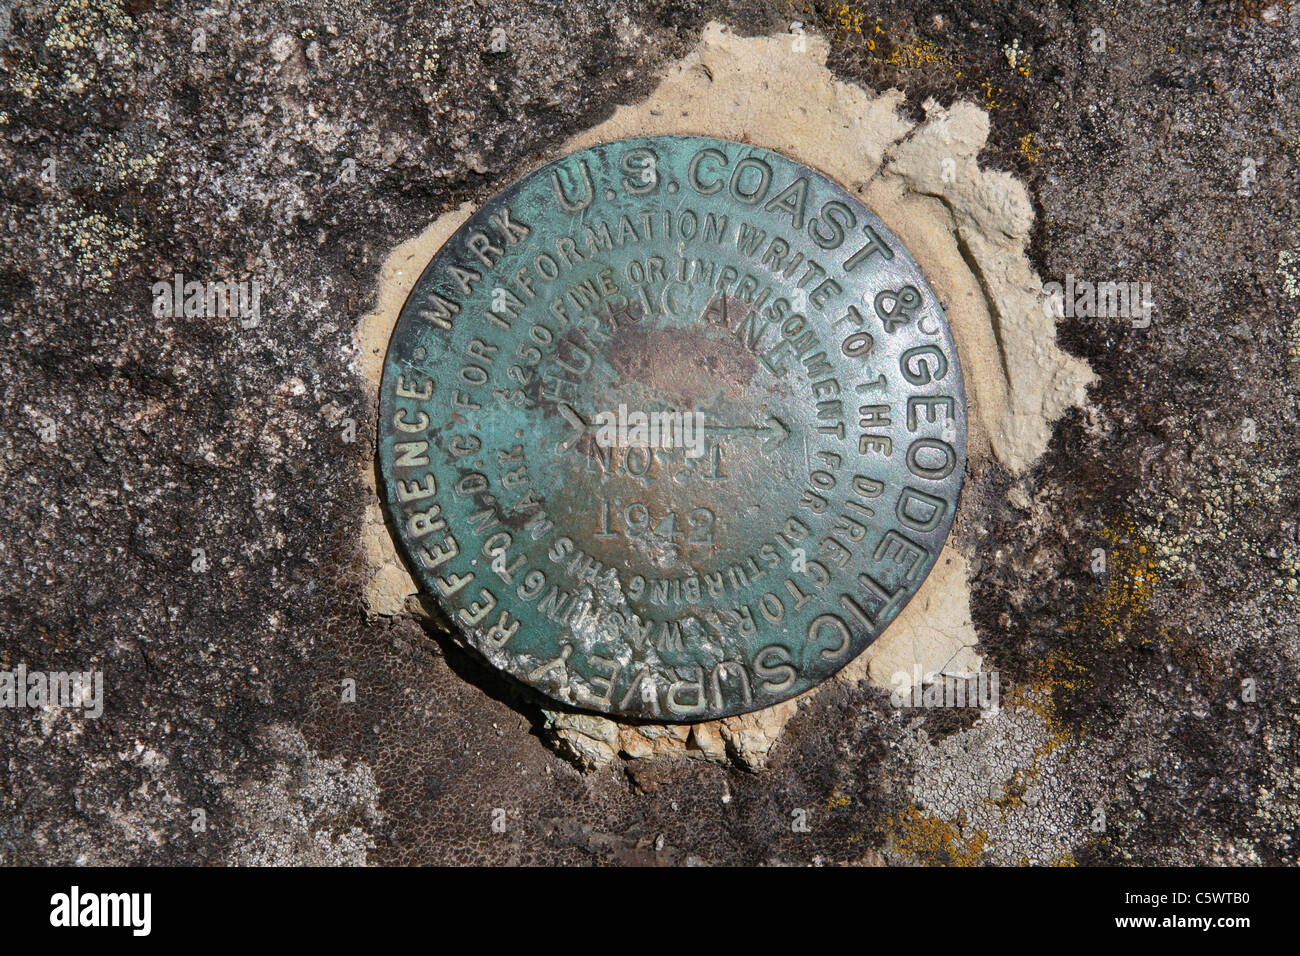 US Coast and Geodetic Survey Triangulation Station Mountaintop Benchmark, Hurricane Mountain in the Adirondacks, Placed in 1942 Stock Photo